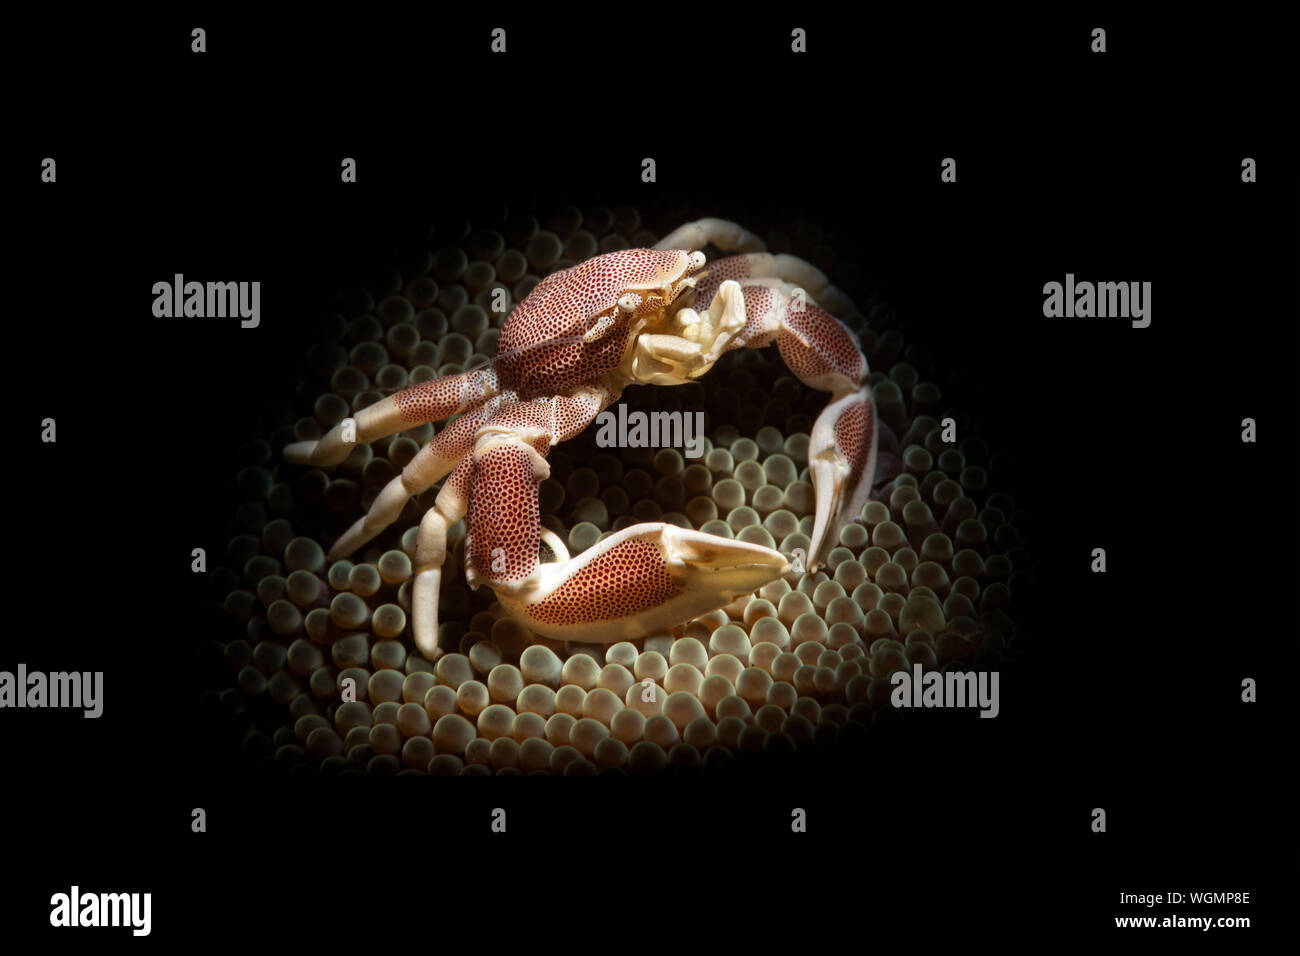 A porcelain crab, lit with a snoot, sits in a sea anemone waiting to feed on animals the anemone catches. Stock Photo